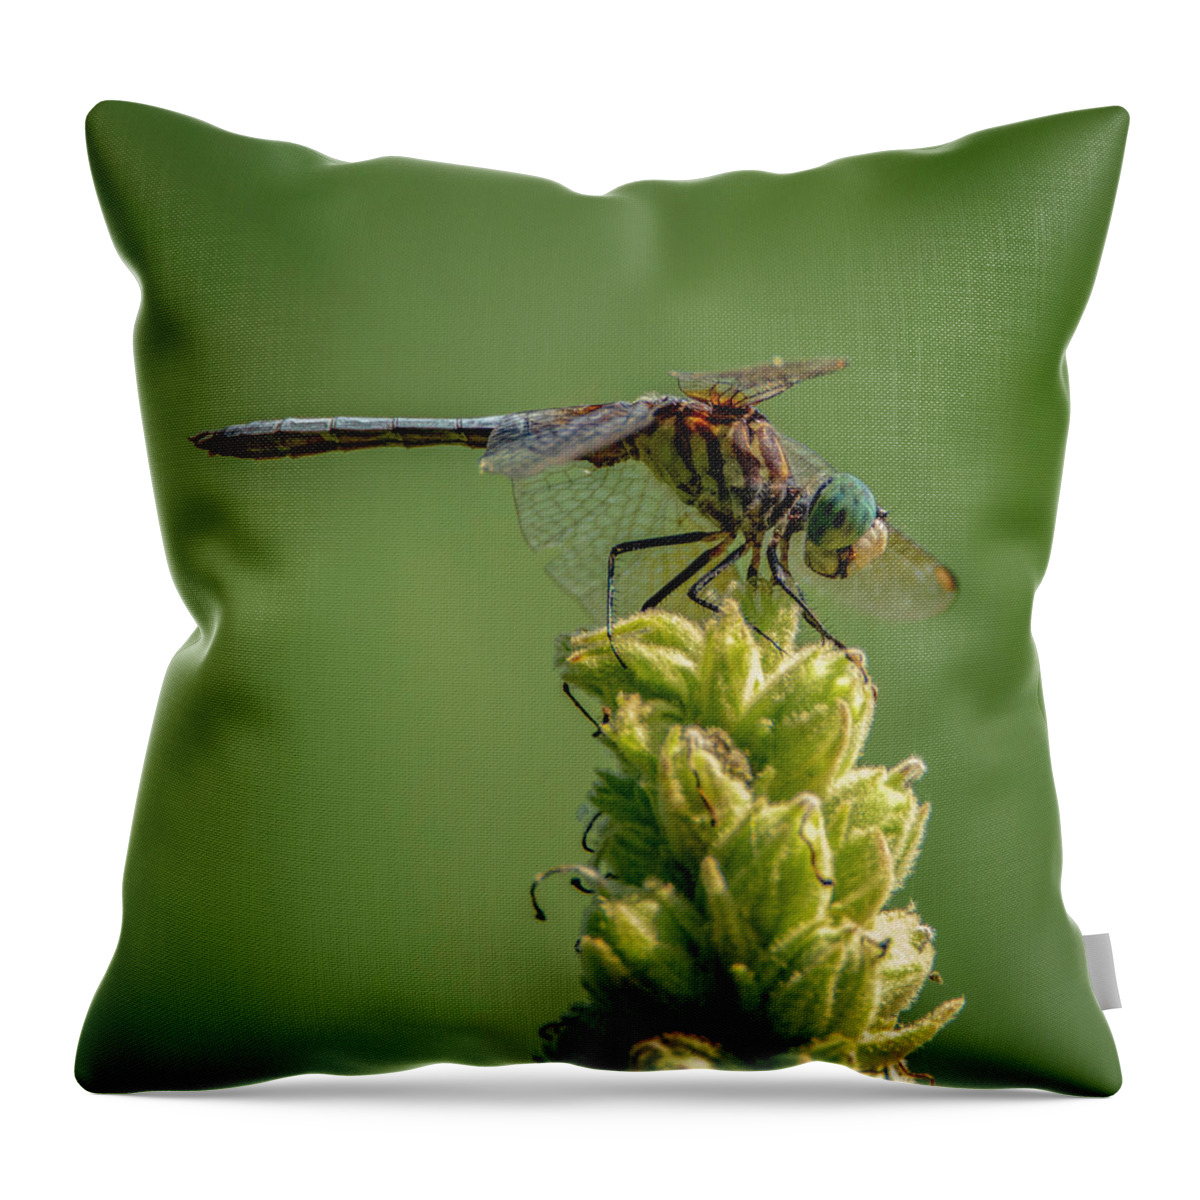 Insect Throw Pillow featuring the photograph Dragon Fly by Cathy Kovarik